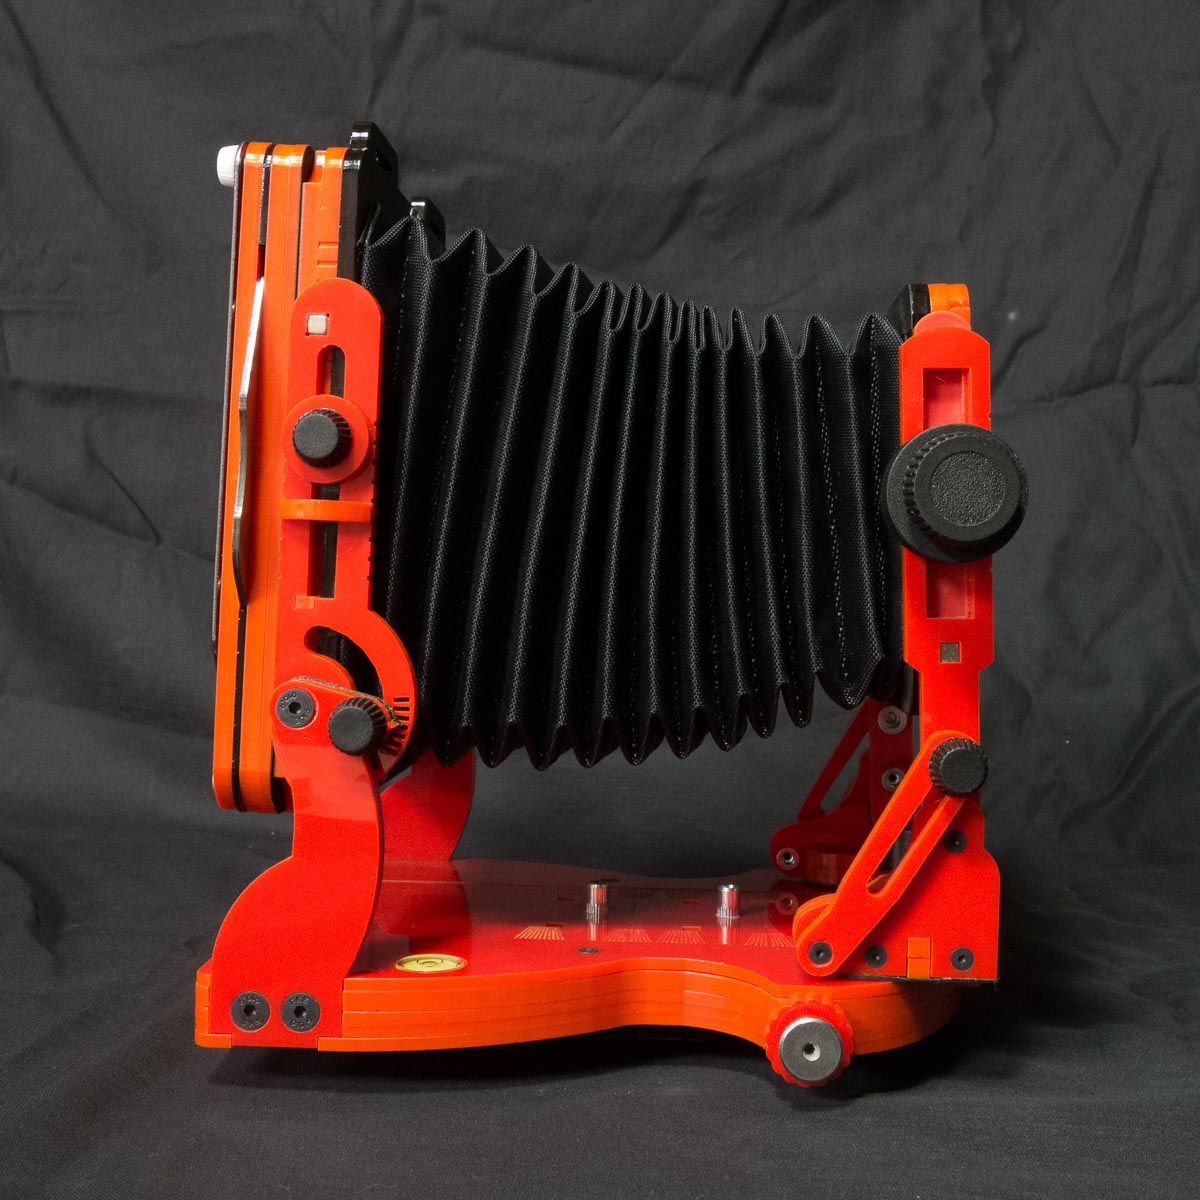 Chroma 4x5 review - Step 3: Open